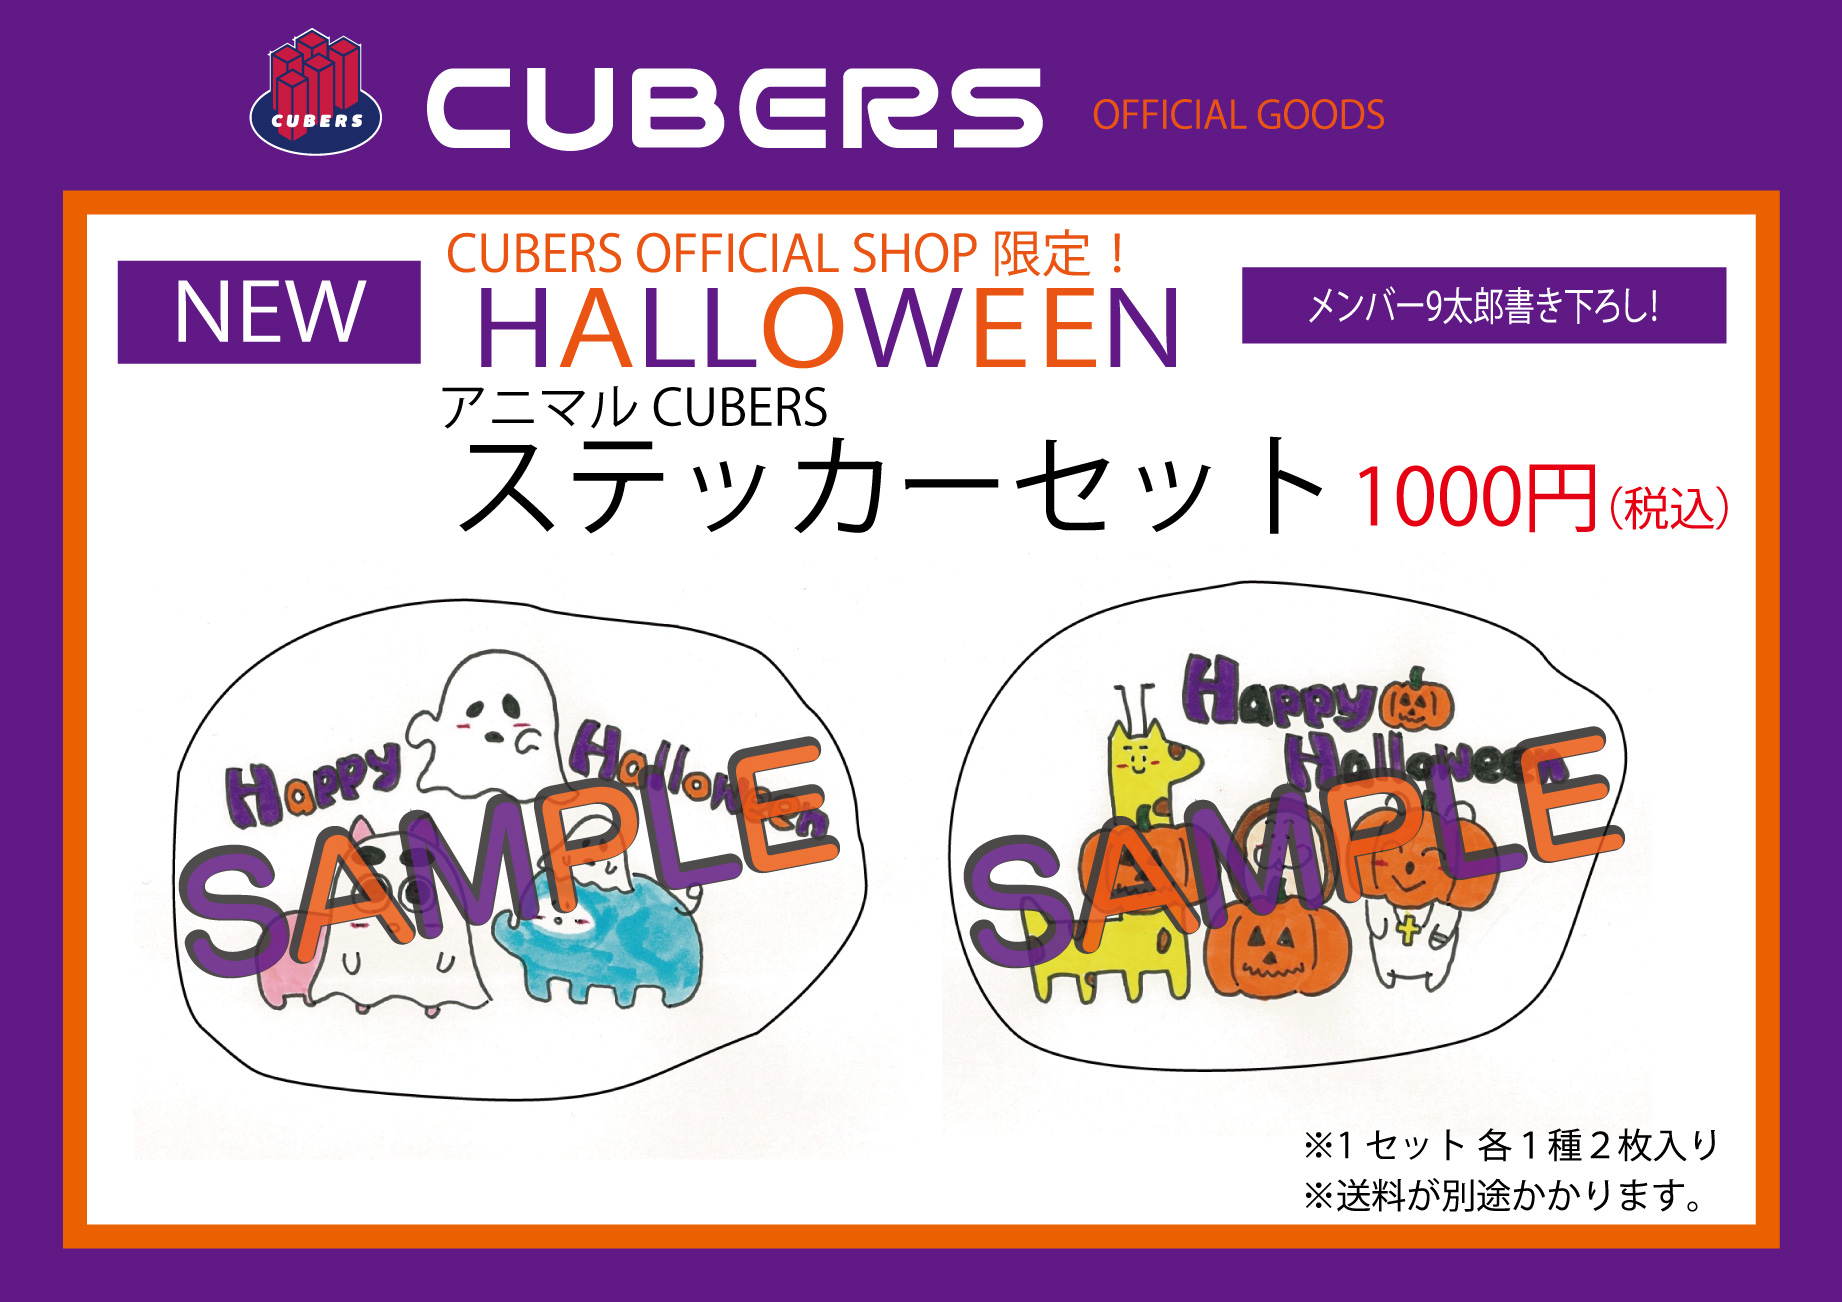 【NEWS】CUBERS OFFICIAL SHOPにて『HALLOWEEN アニマルCUBERSステッカーセット』を数量限定販売！(10/29〜10/31限定)